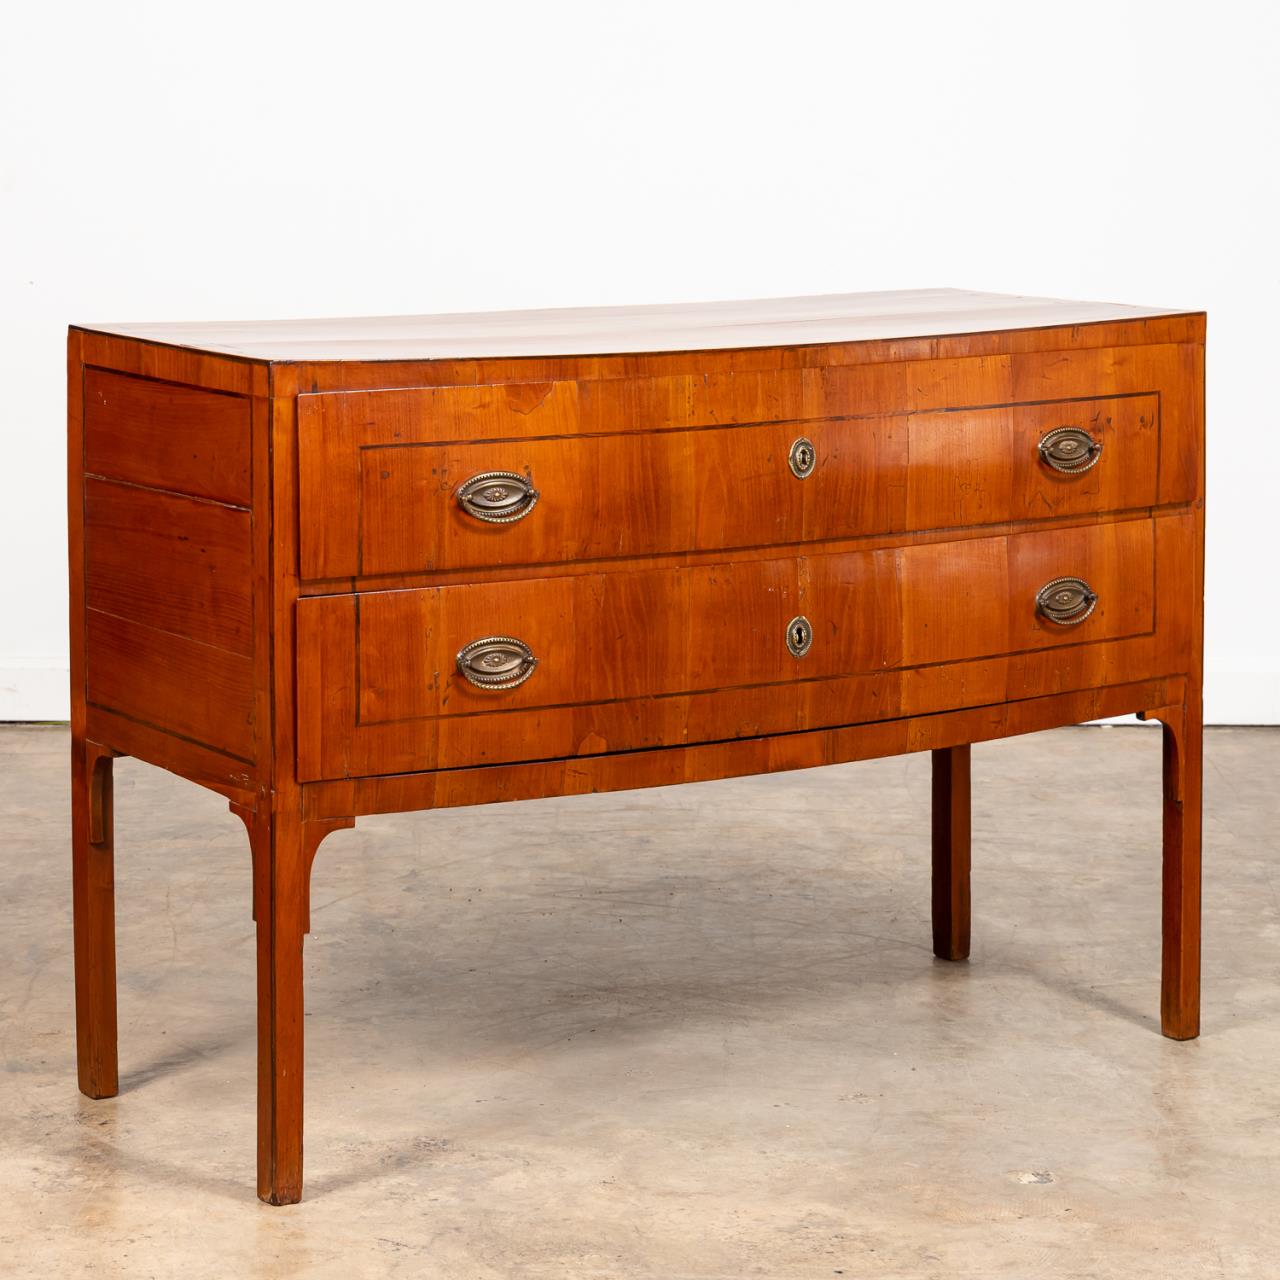 19TH C. NEOCLASSICAL FRUITWOOD